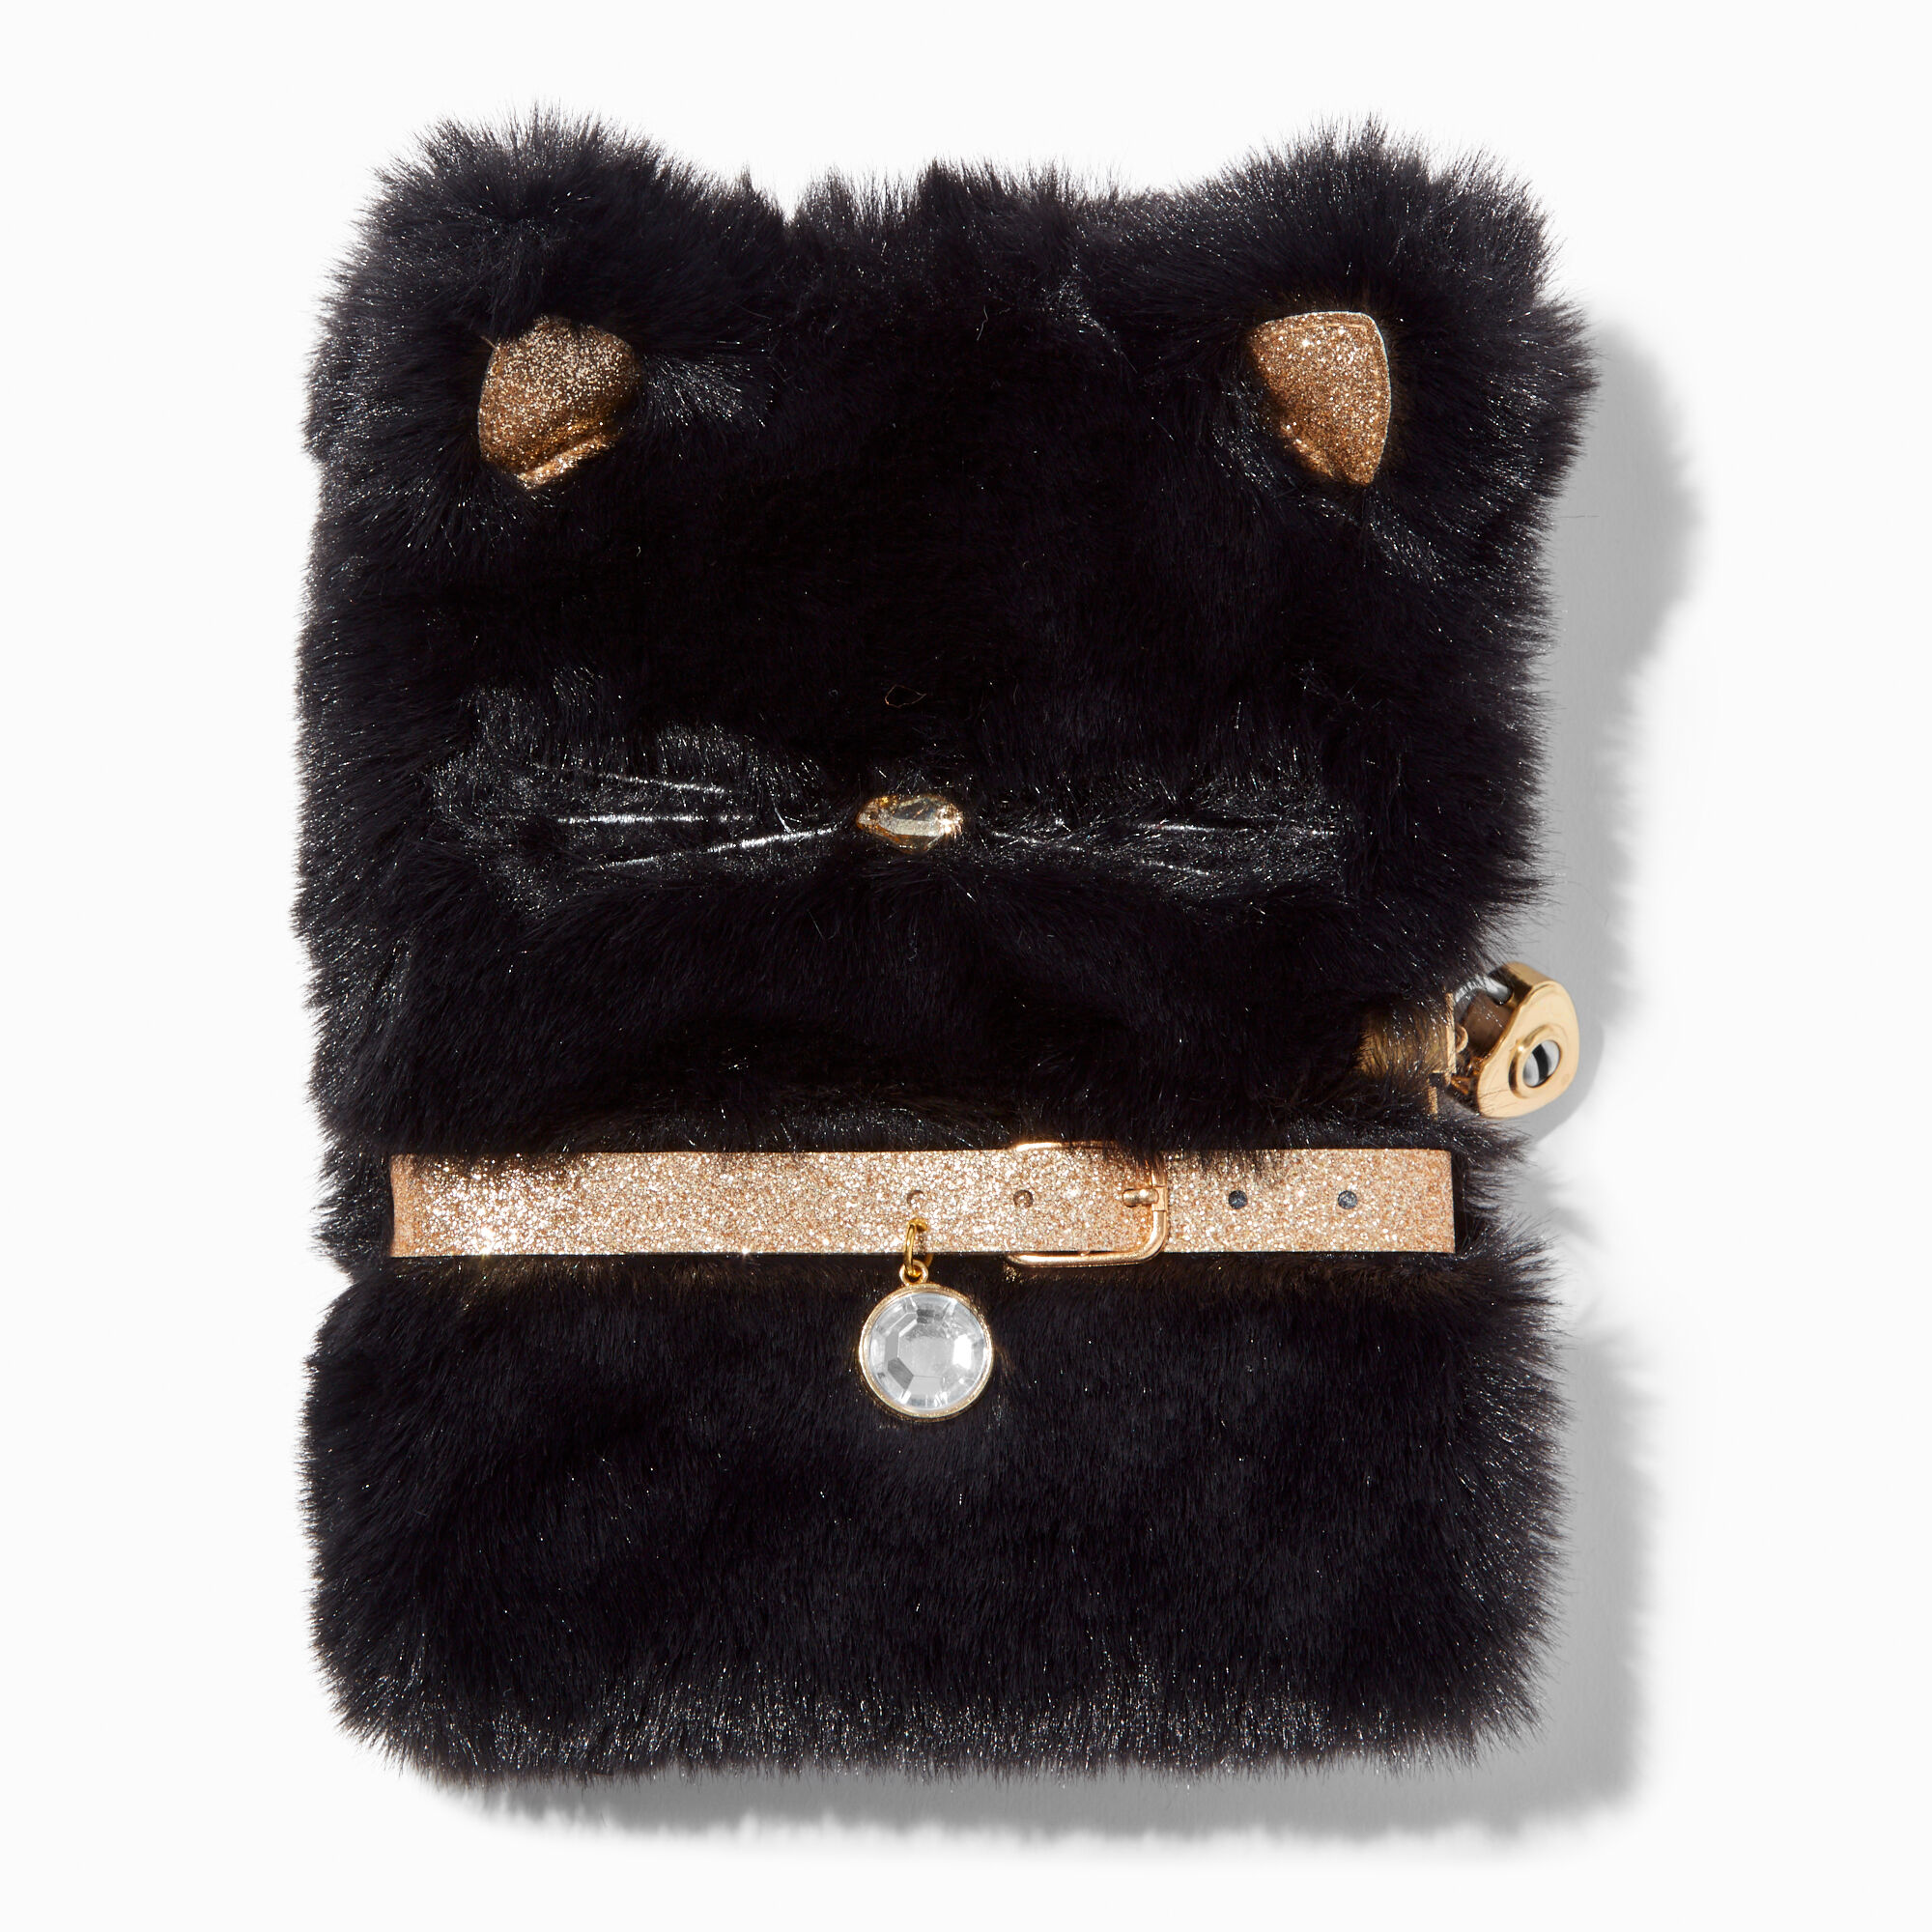 View Claires Cat Lock Diary Black information